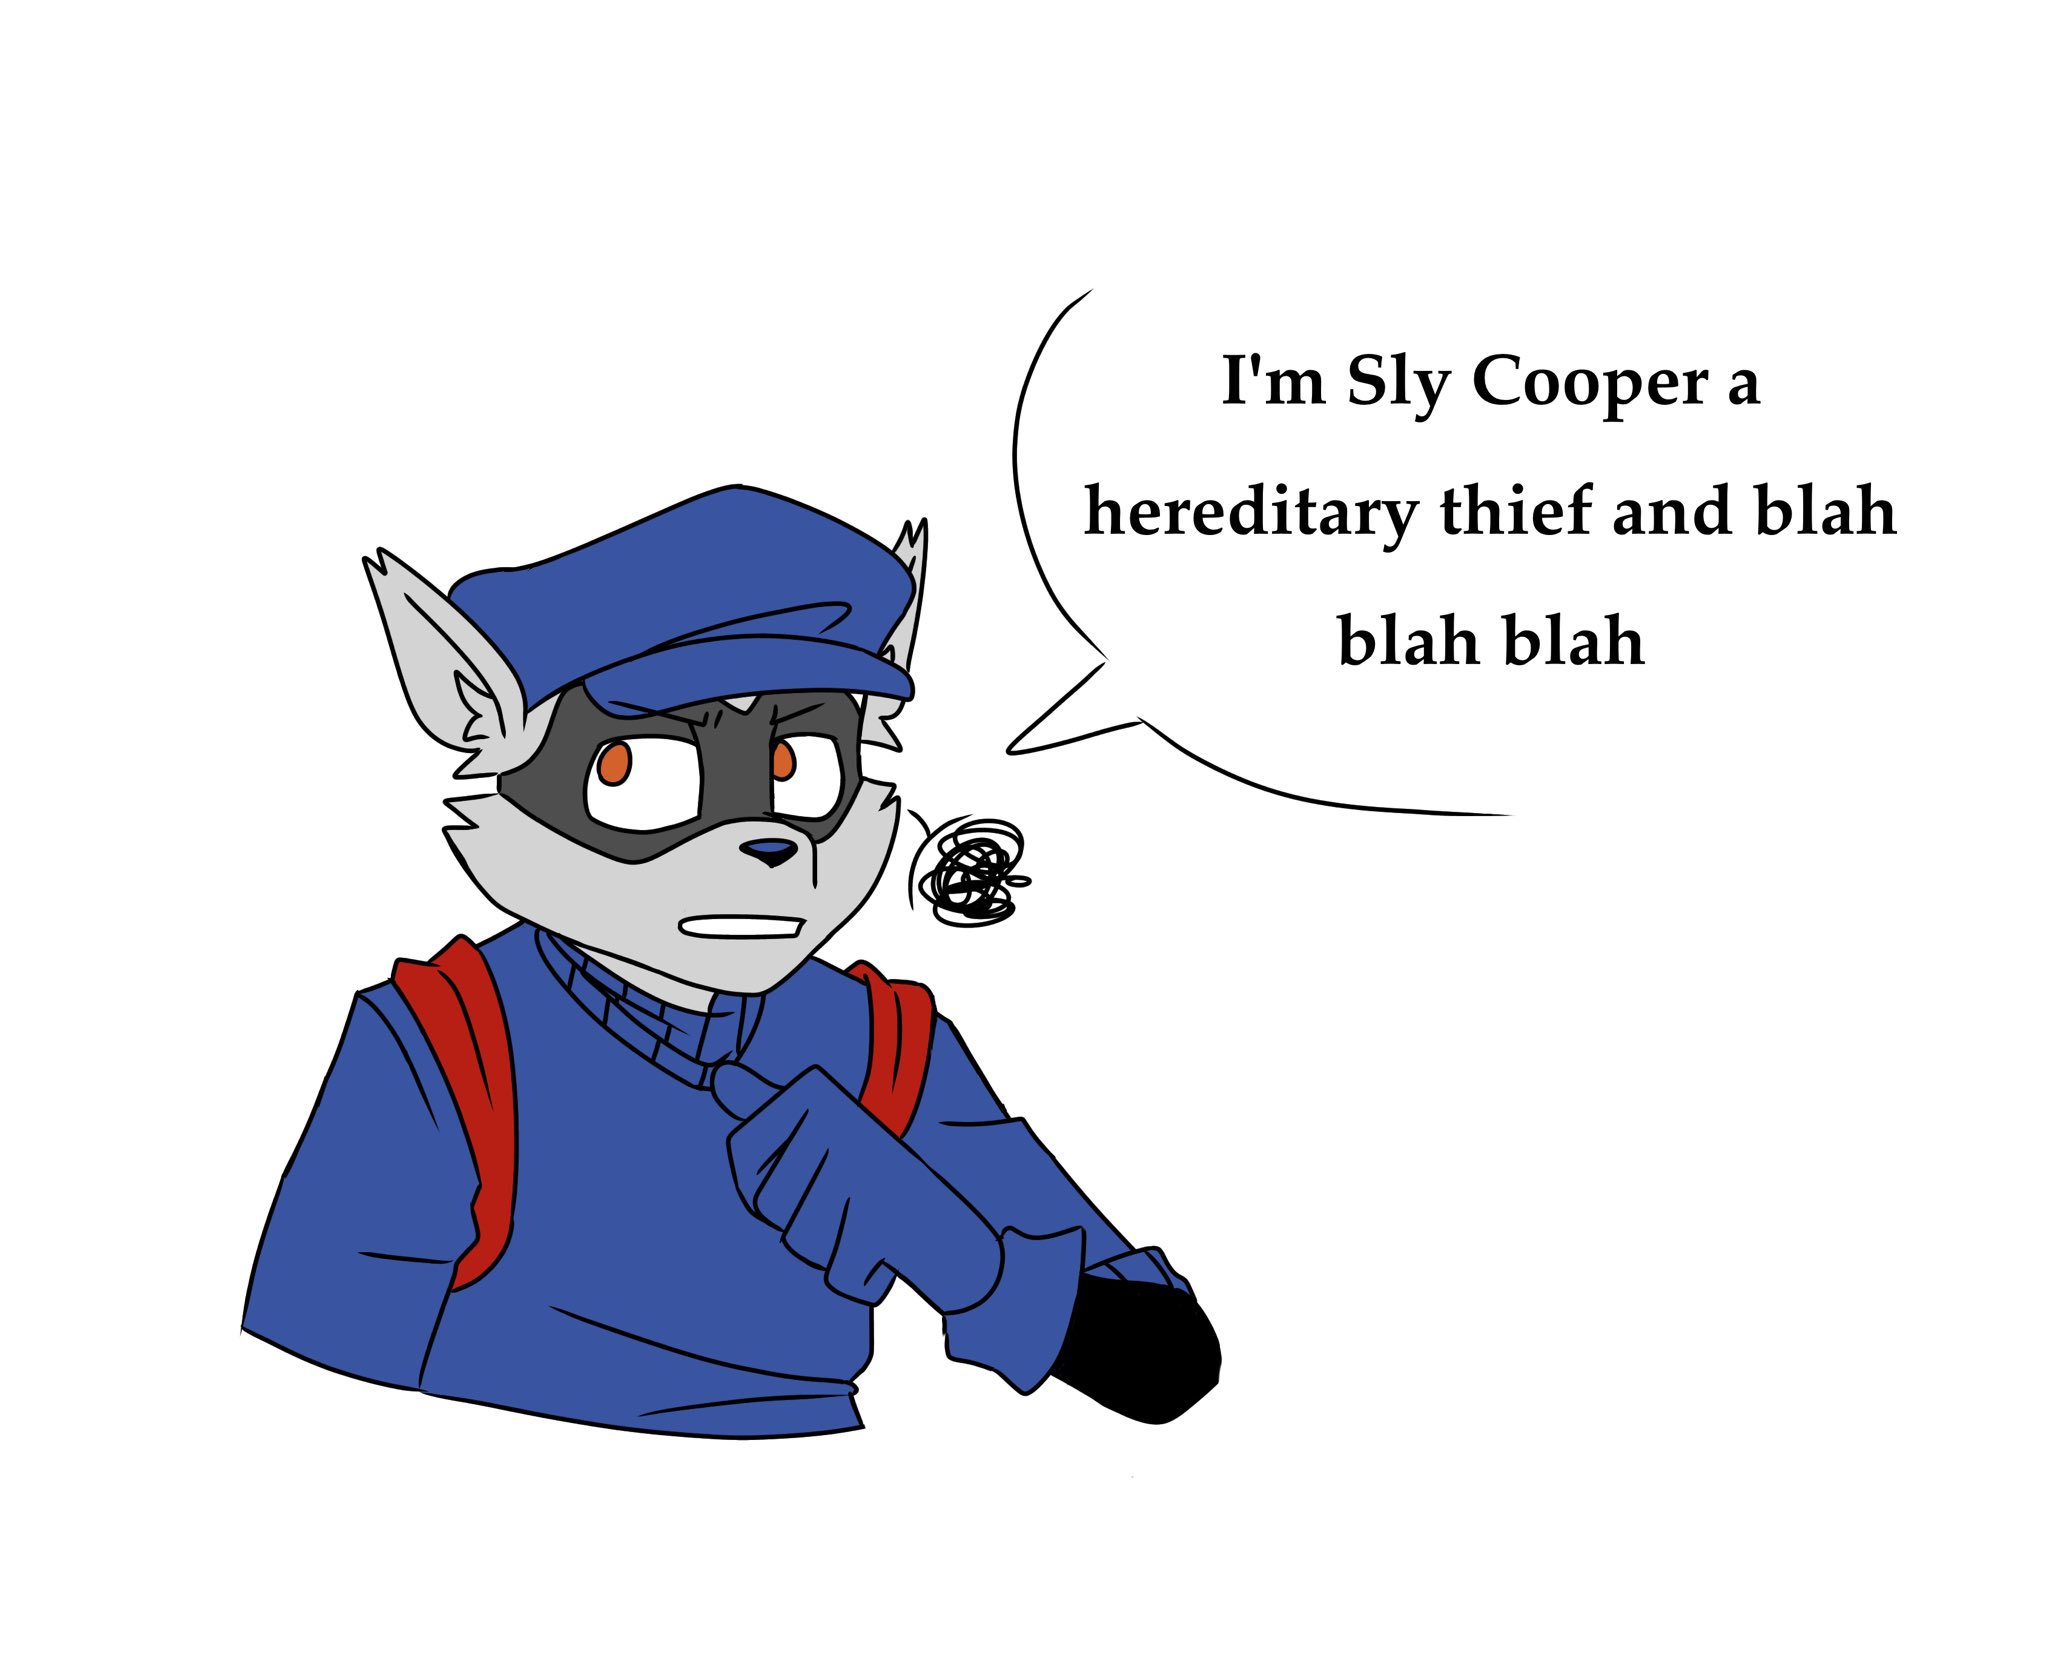 Sly Cooper/OC] - I'm Doing This For You, Brother by